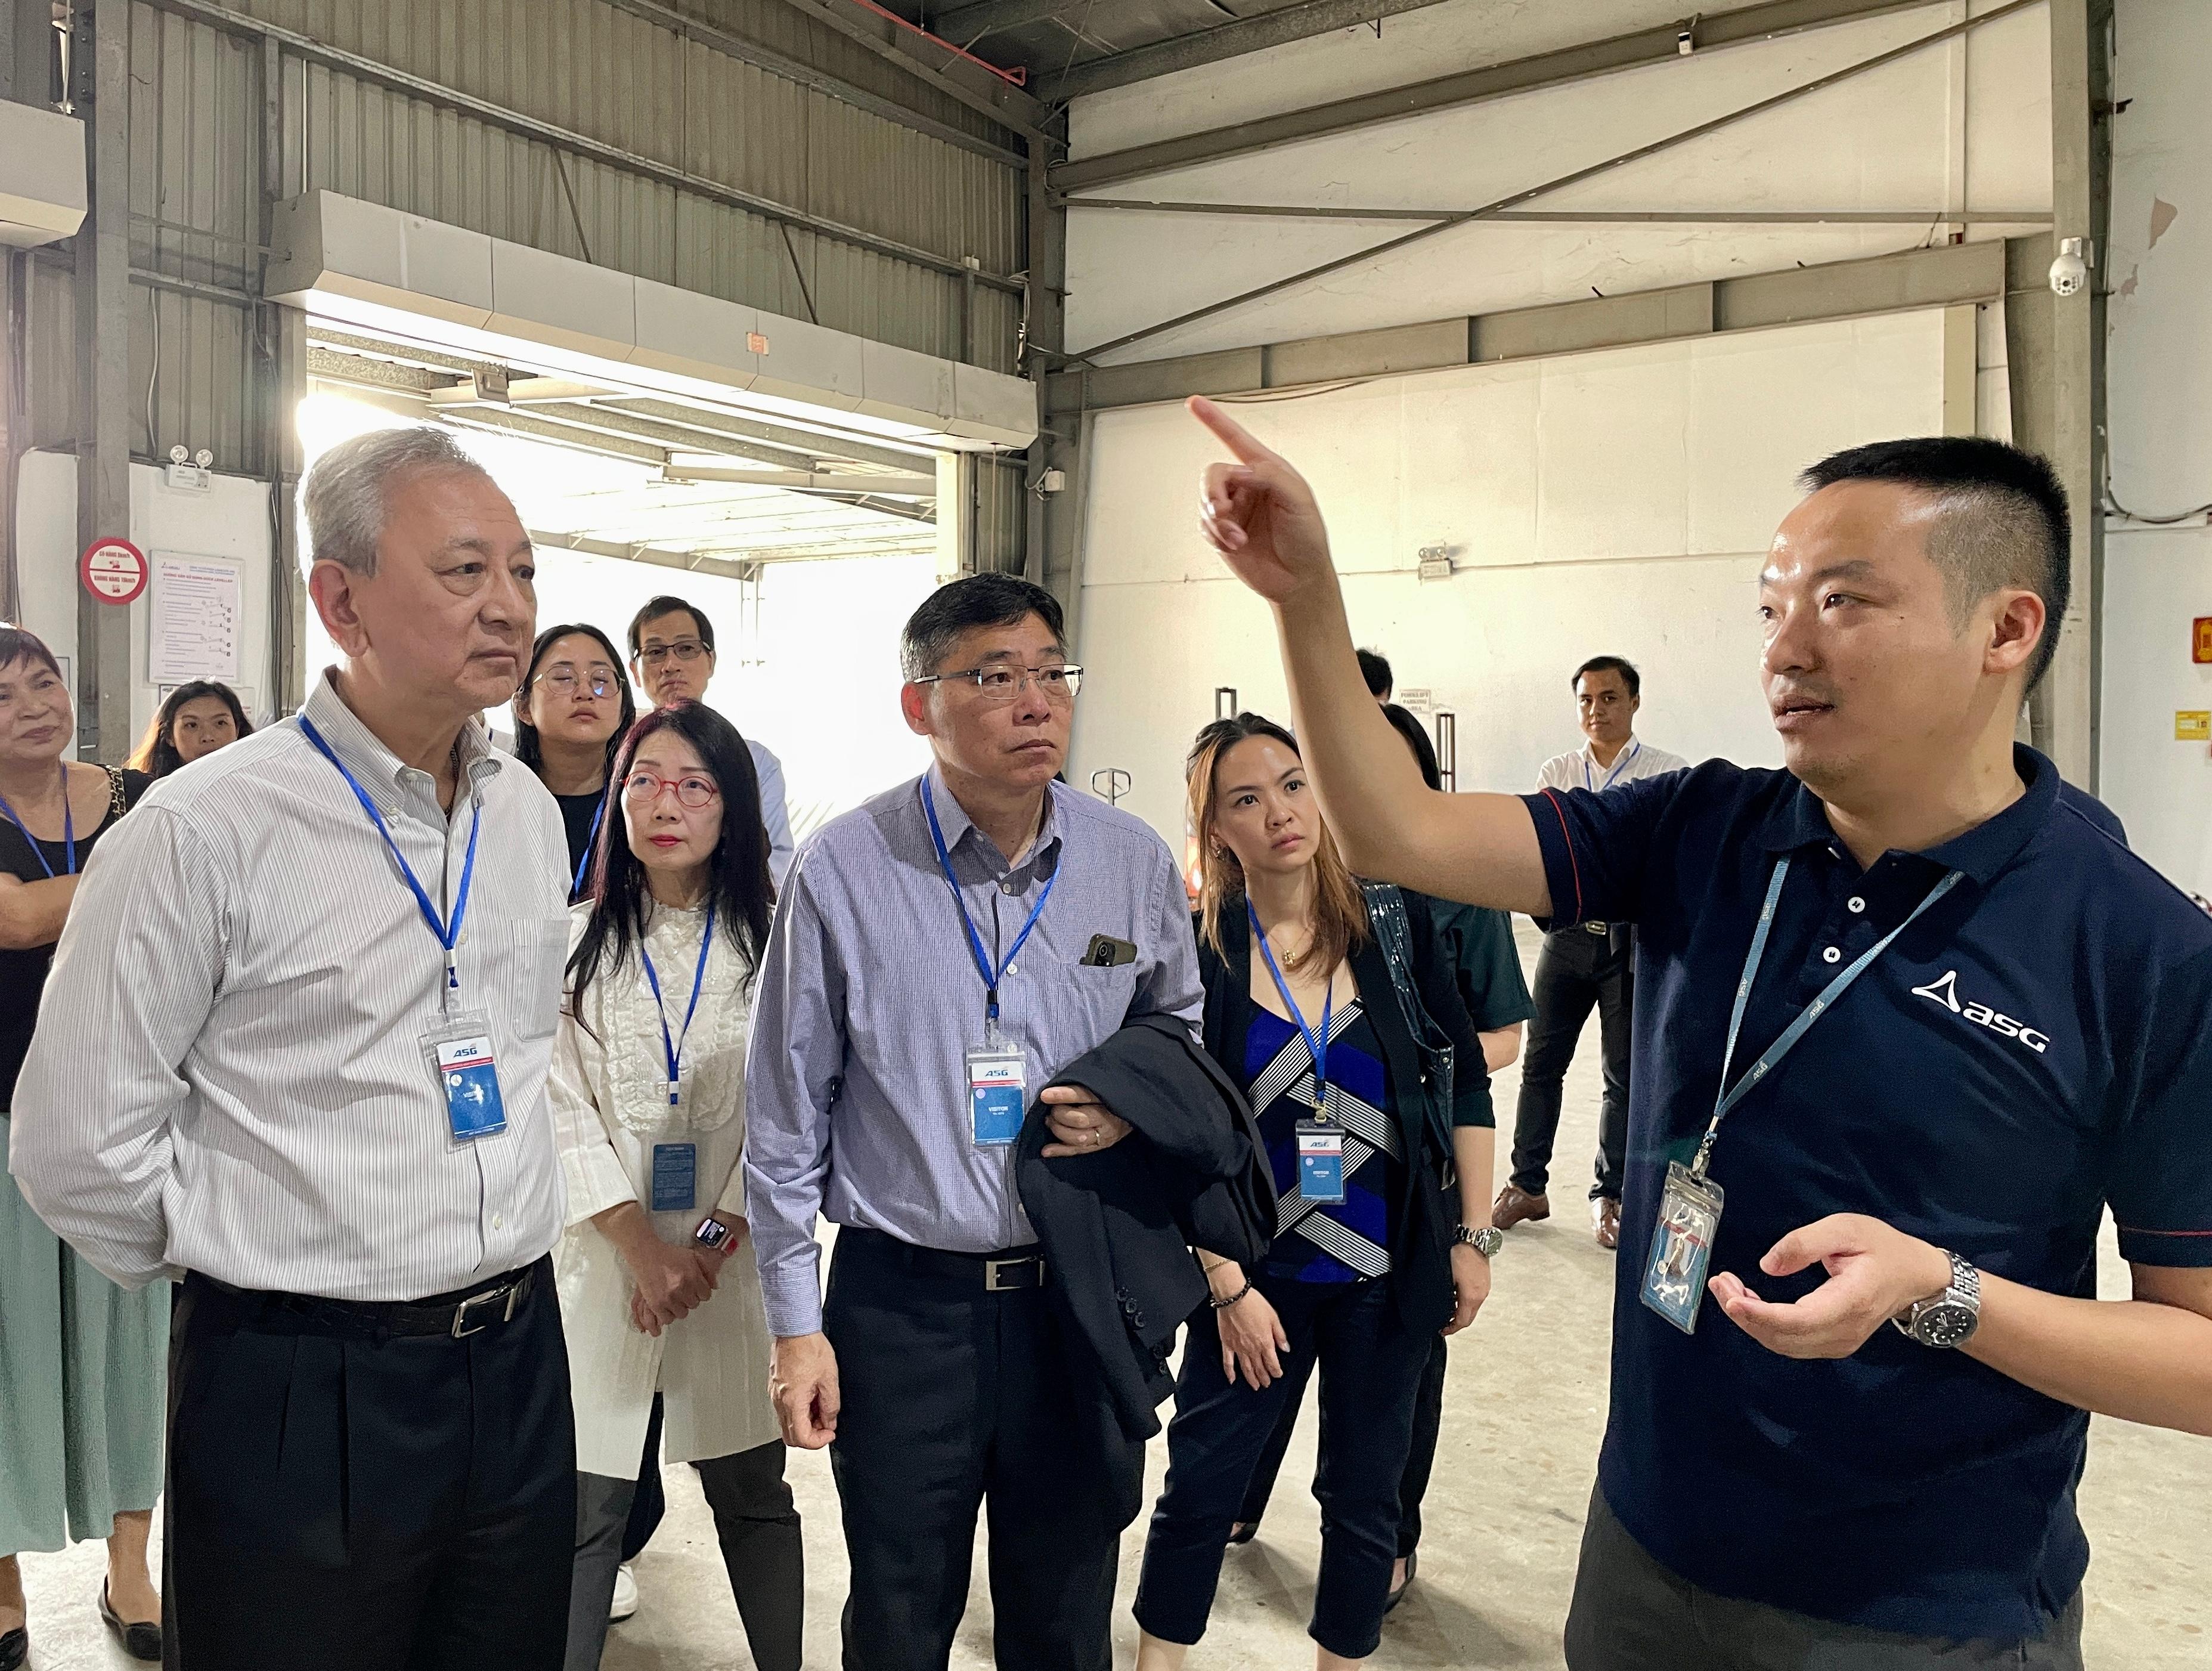 The Secretary for Transport and Logistics, Mr Lam Sai-hung (third right), and members of the Hong Kong Logistics Development Council visited a large-scale logistics facility in Hanoi, Vietnam, and received an operational briefing from a staff member yesterday afternoon (October 10). 